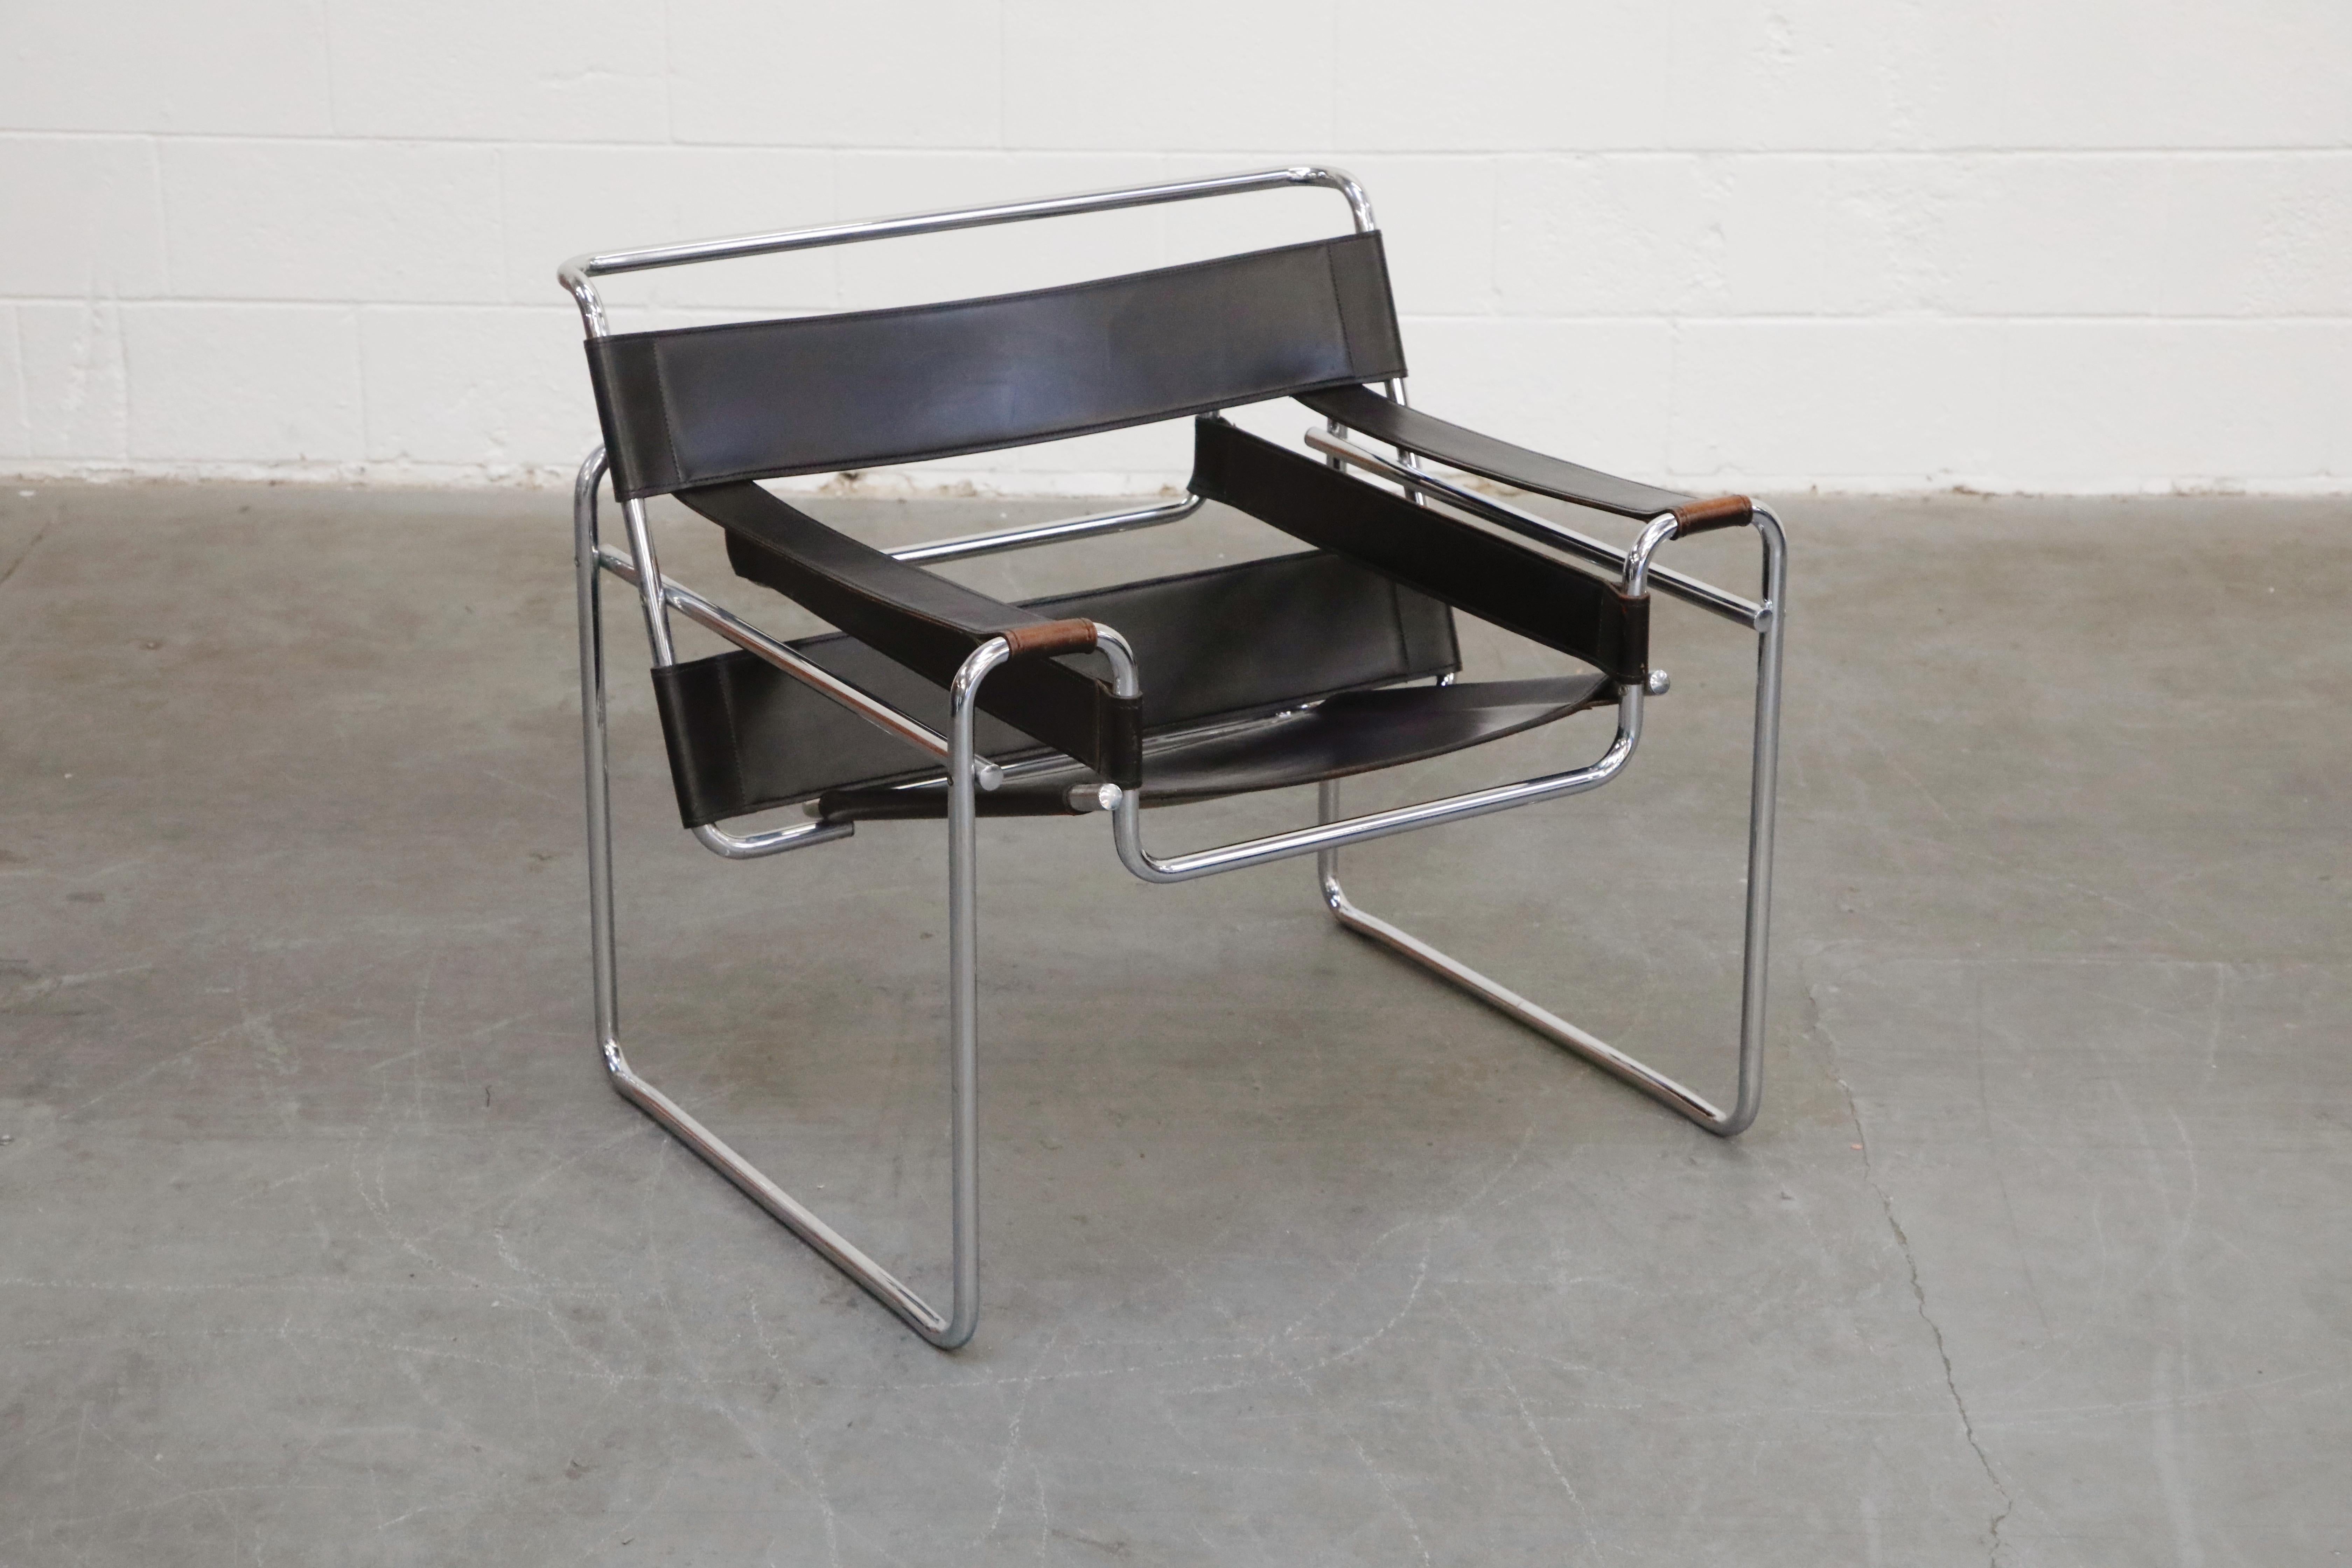 Bauhaus Marcel Breuer Wassily Styled Chrome and Black Leather Sling Chair, c. 1980